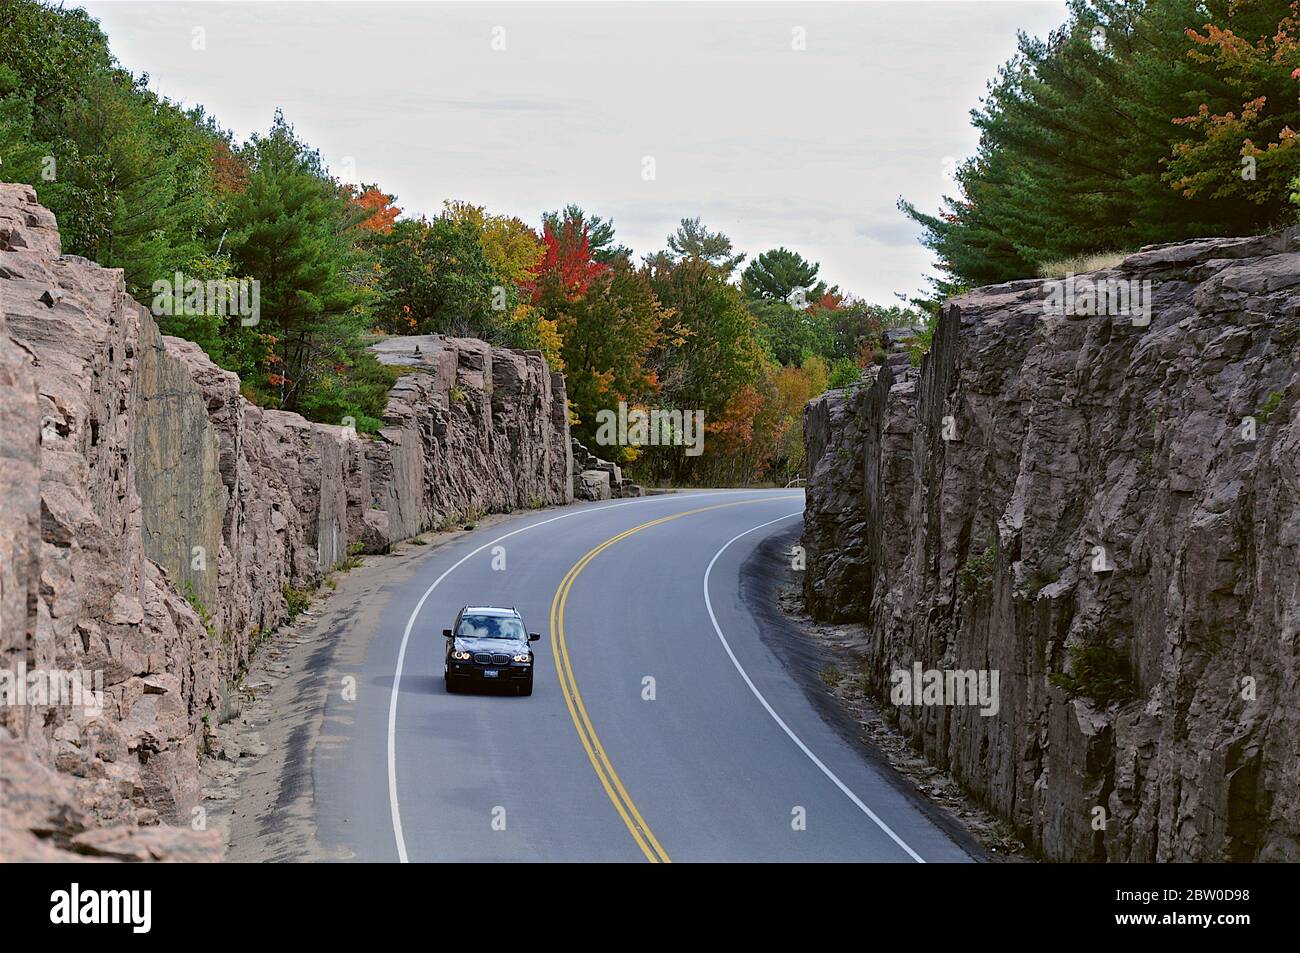 Milford Bay, Ontario / Canada - 10/05/2008: Mountain road cut through the pink granite. Landscape with rocks, autumn leaf color, and beautiful asphalt Stock Photo